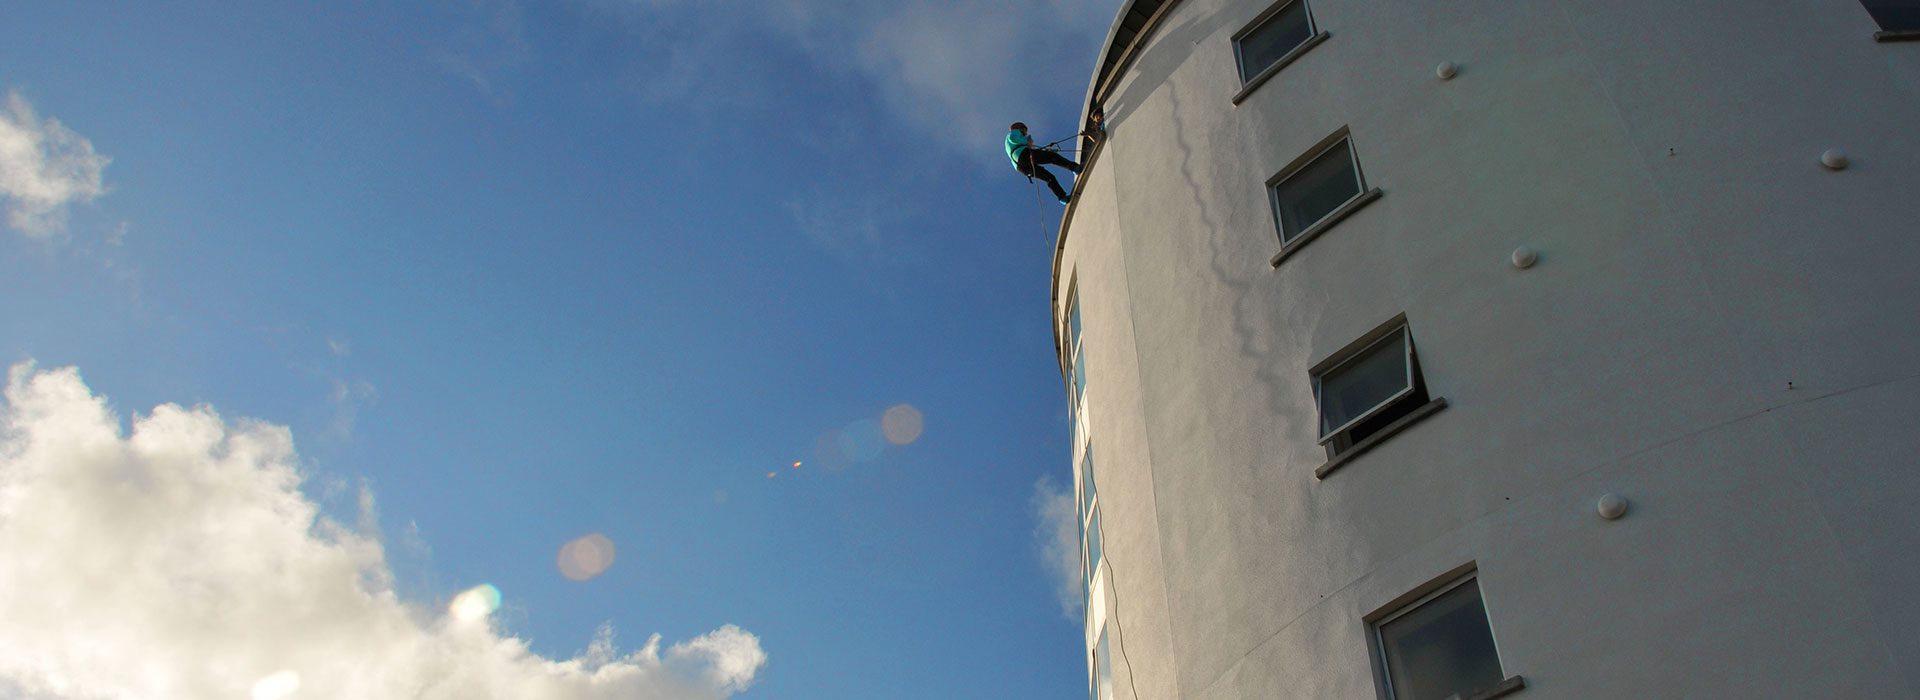 Picture of abseiler descending The SMO Tower